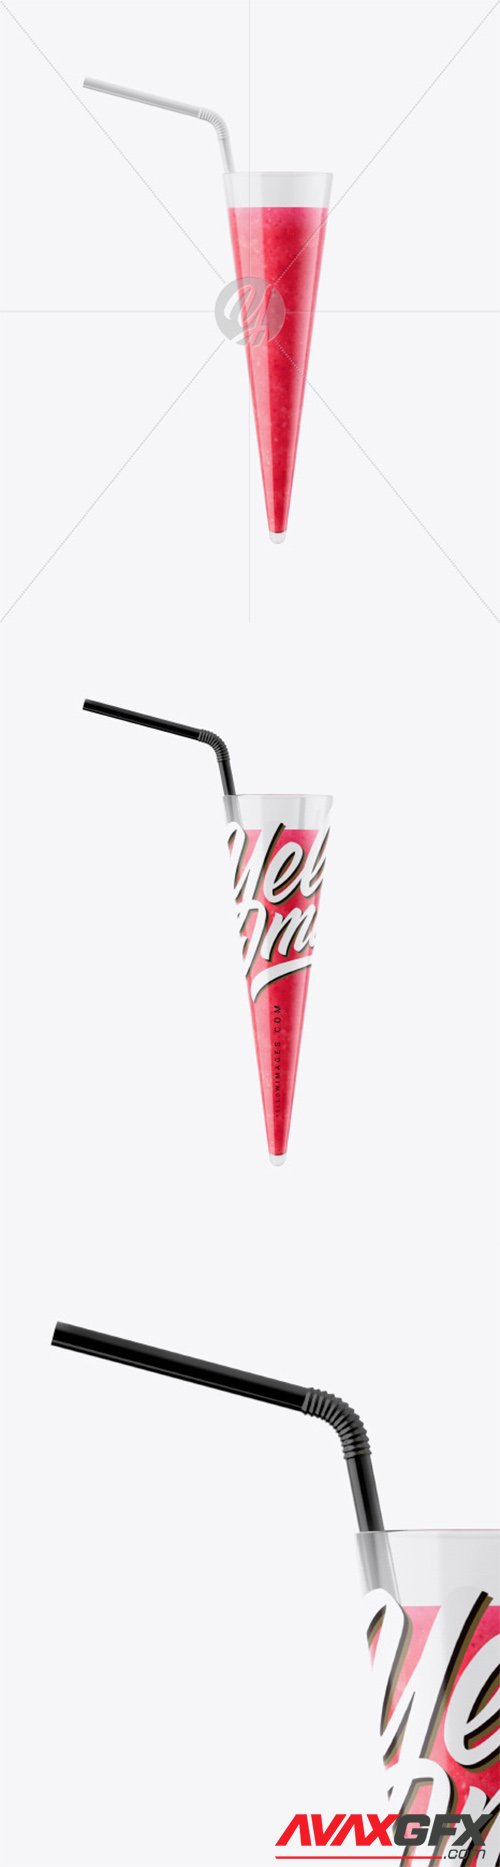 Download Matte Plastic Cup w/ Straw Mockup 68695 » AVAXGFX - All Downloads that You Need in One Place ...